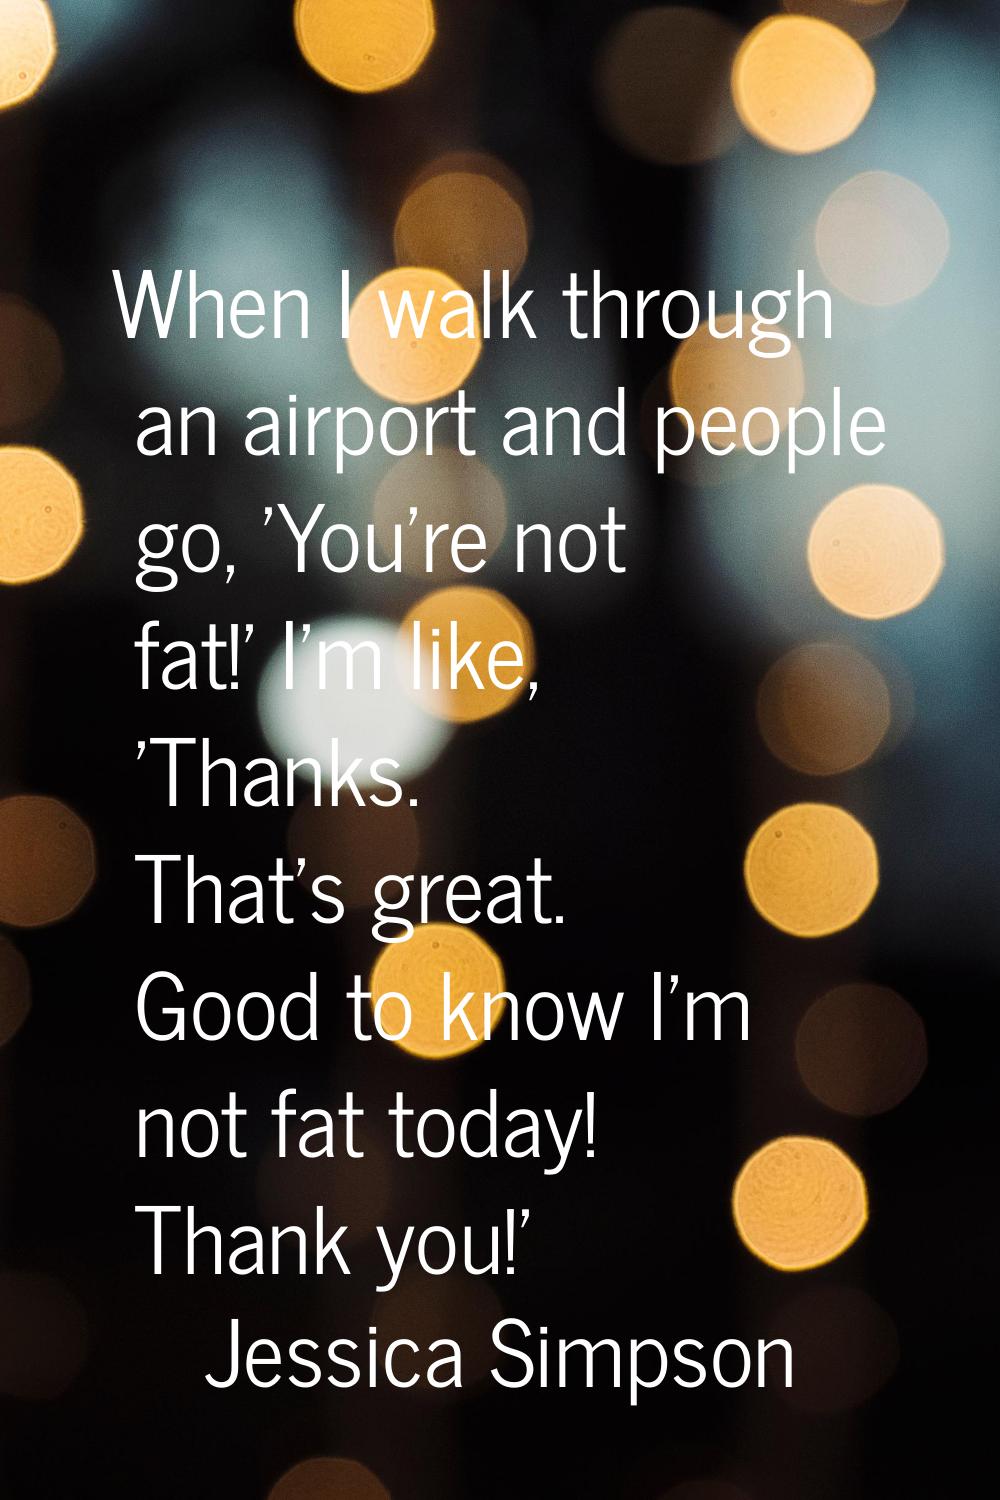 When I walk through an airport and people go, 'You're not fat!' I'm like, 'Thanks. That's great. Go